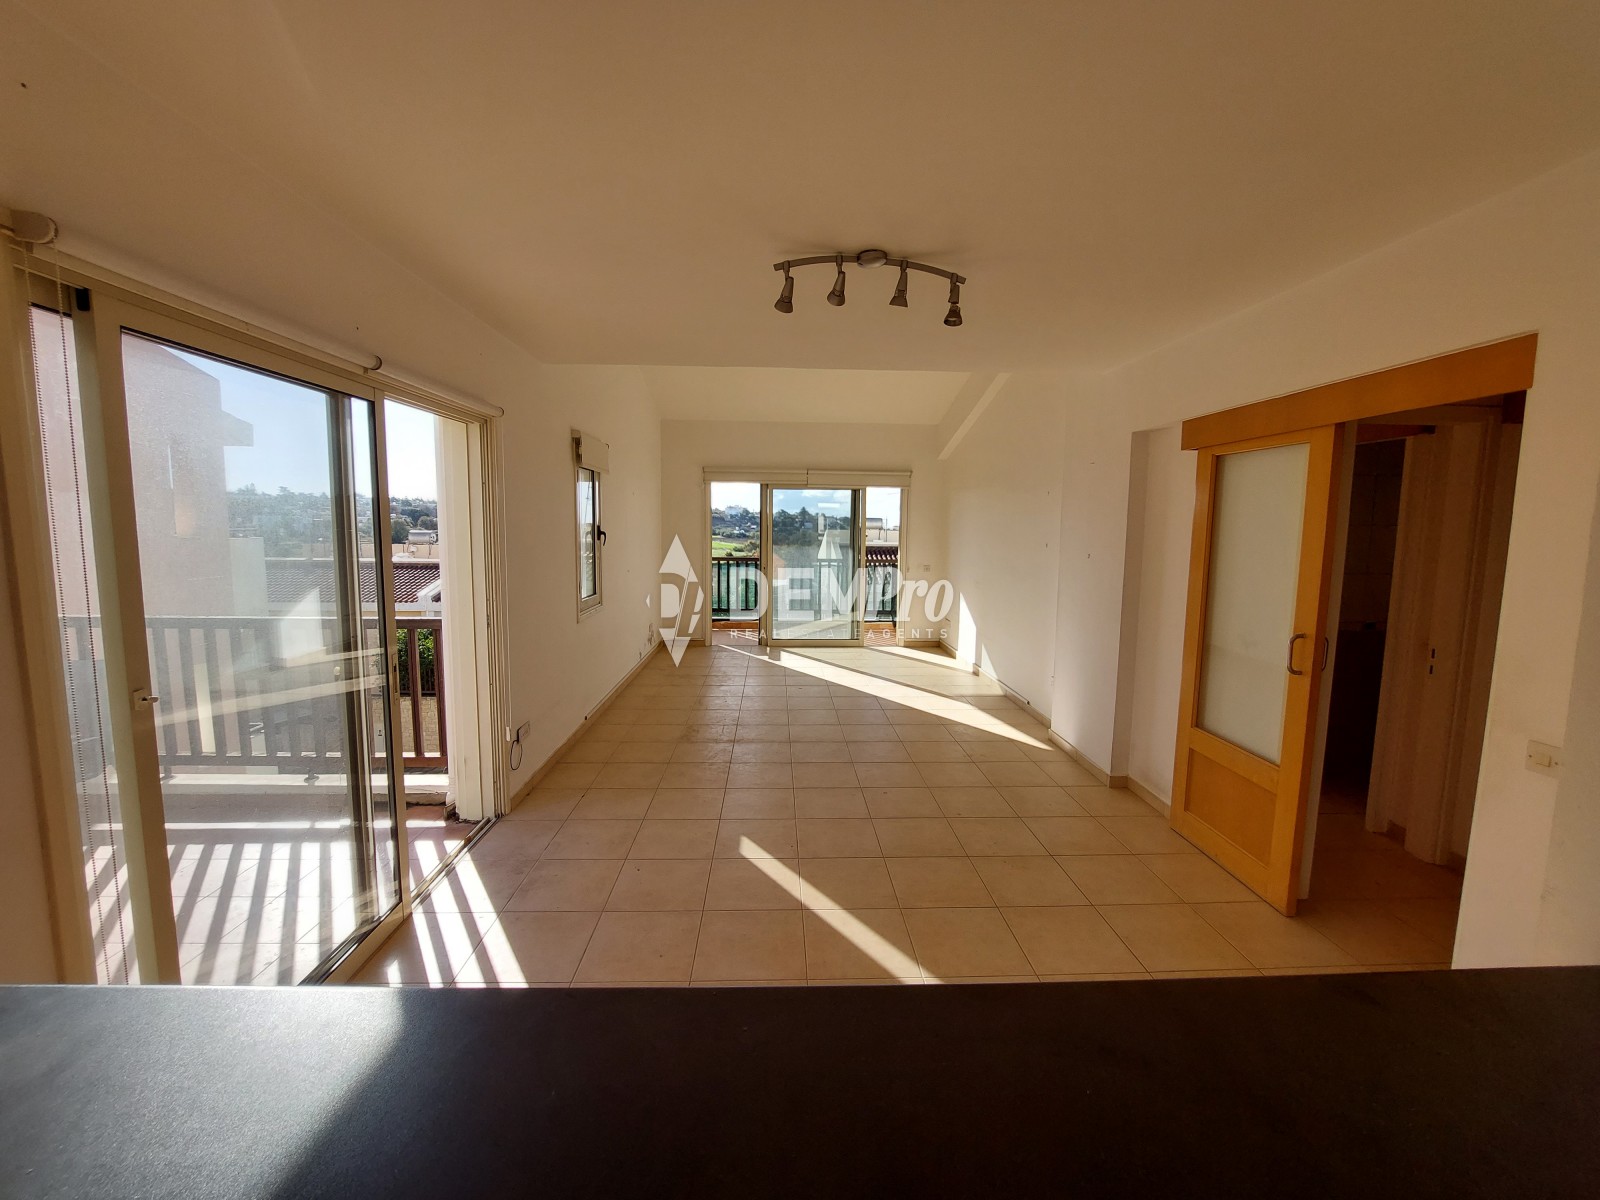 Apartment For Sale in Chloraka, Paphos - DP3744